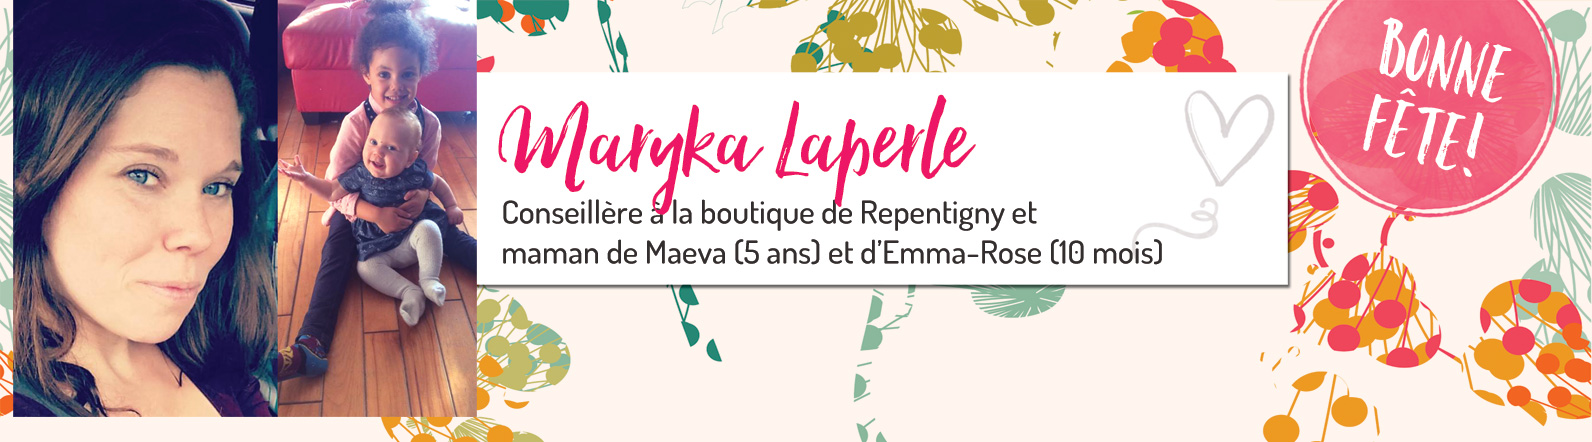 bf-maryka_laperle-infolettre